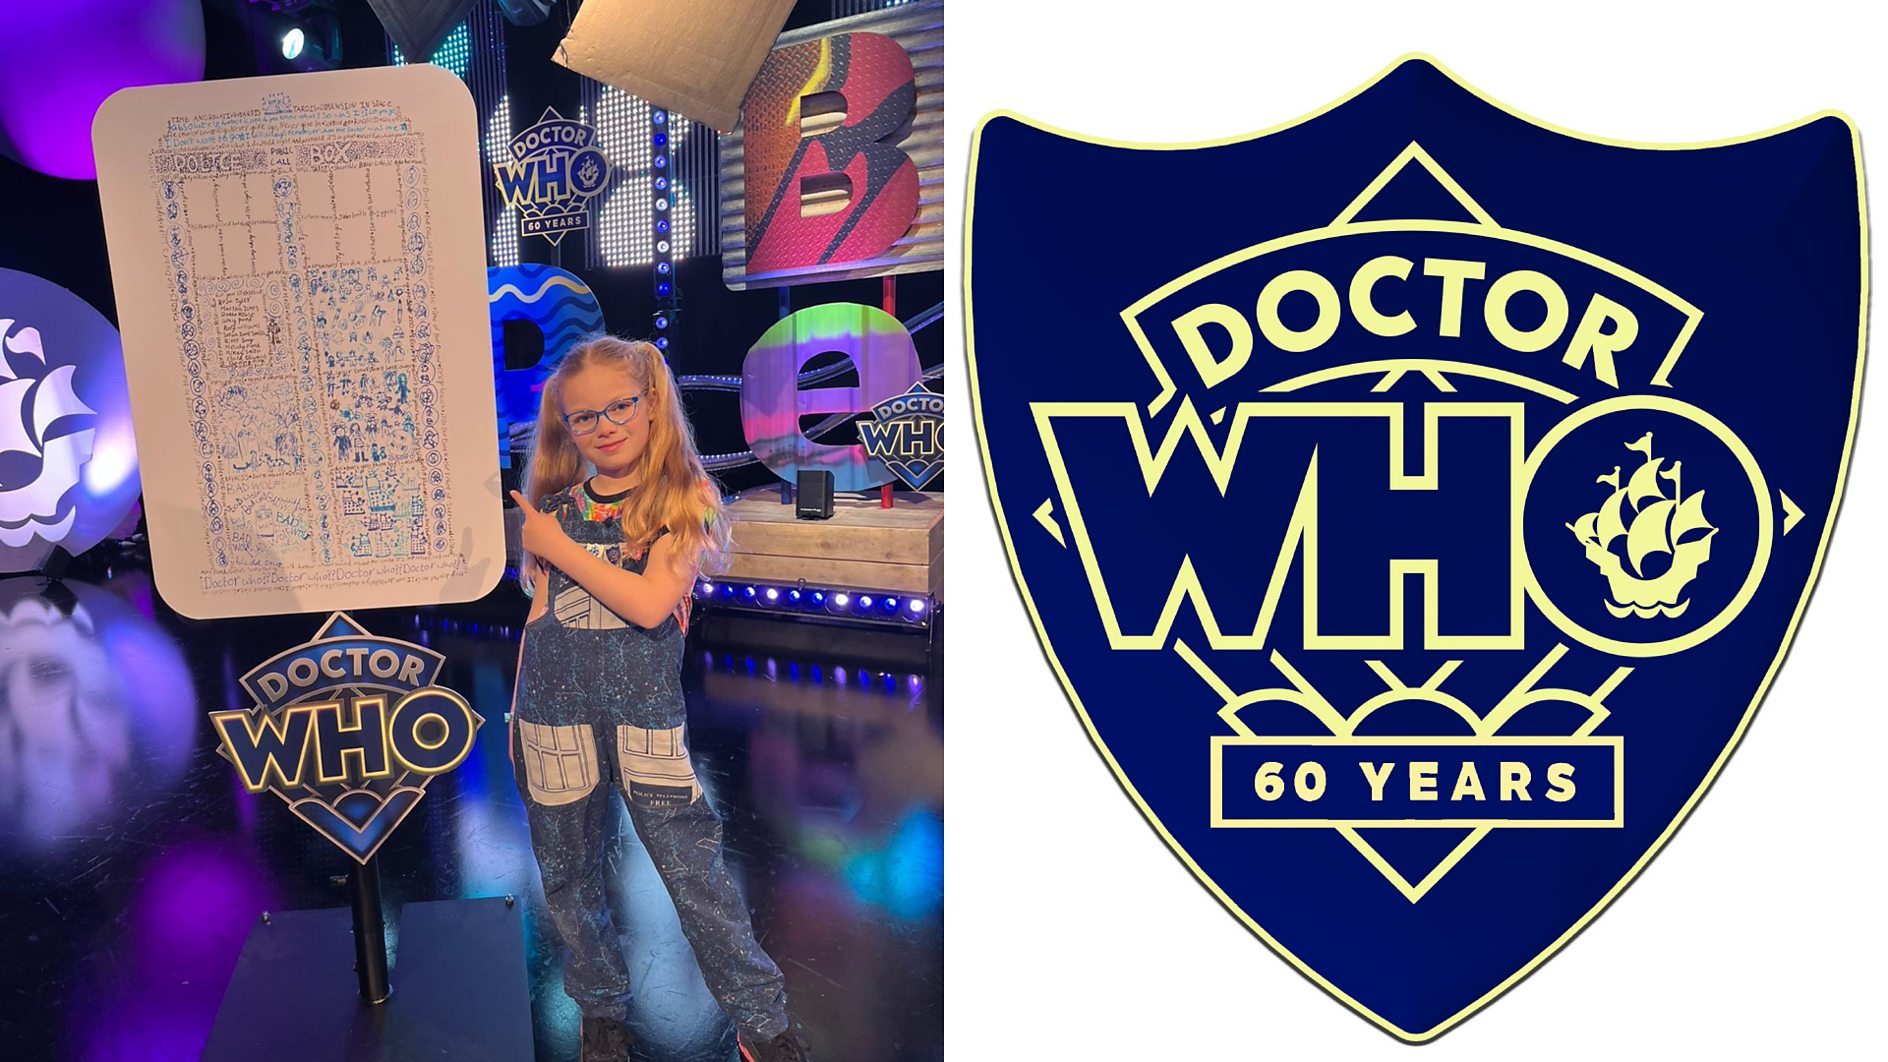 Blue Peter celebrates Doctor Who’s 60th by revealing winners of Doctor Who Competition